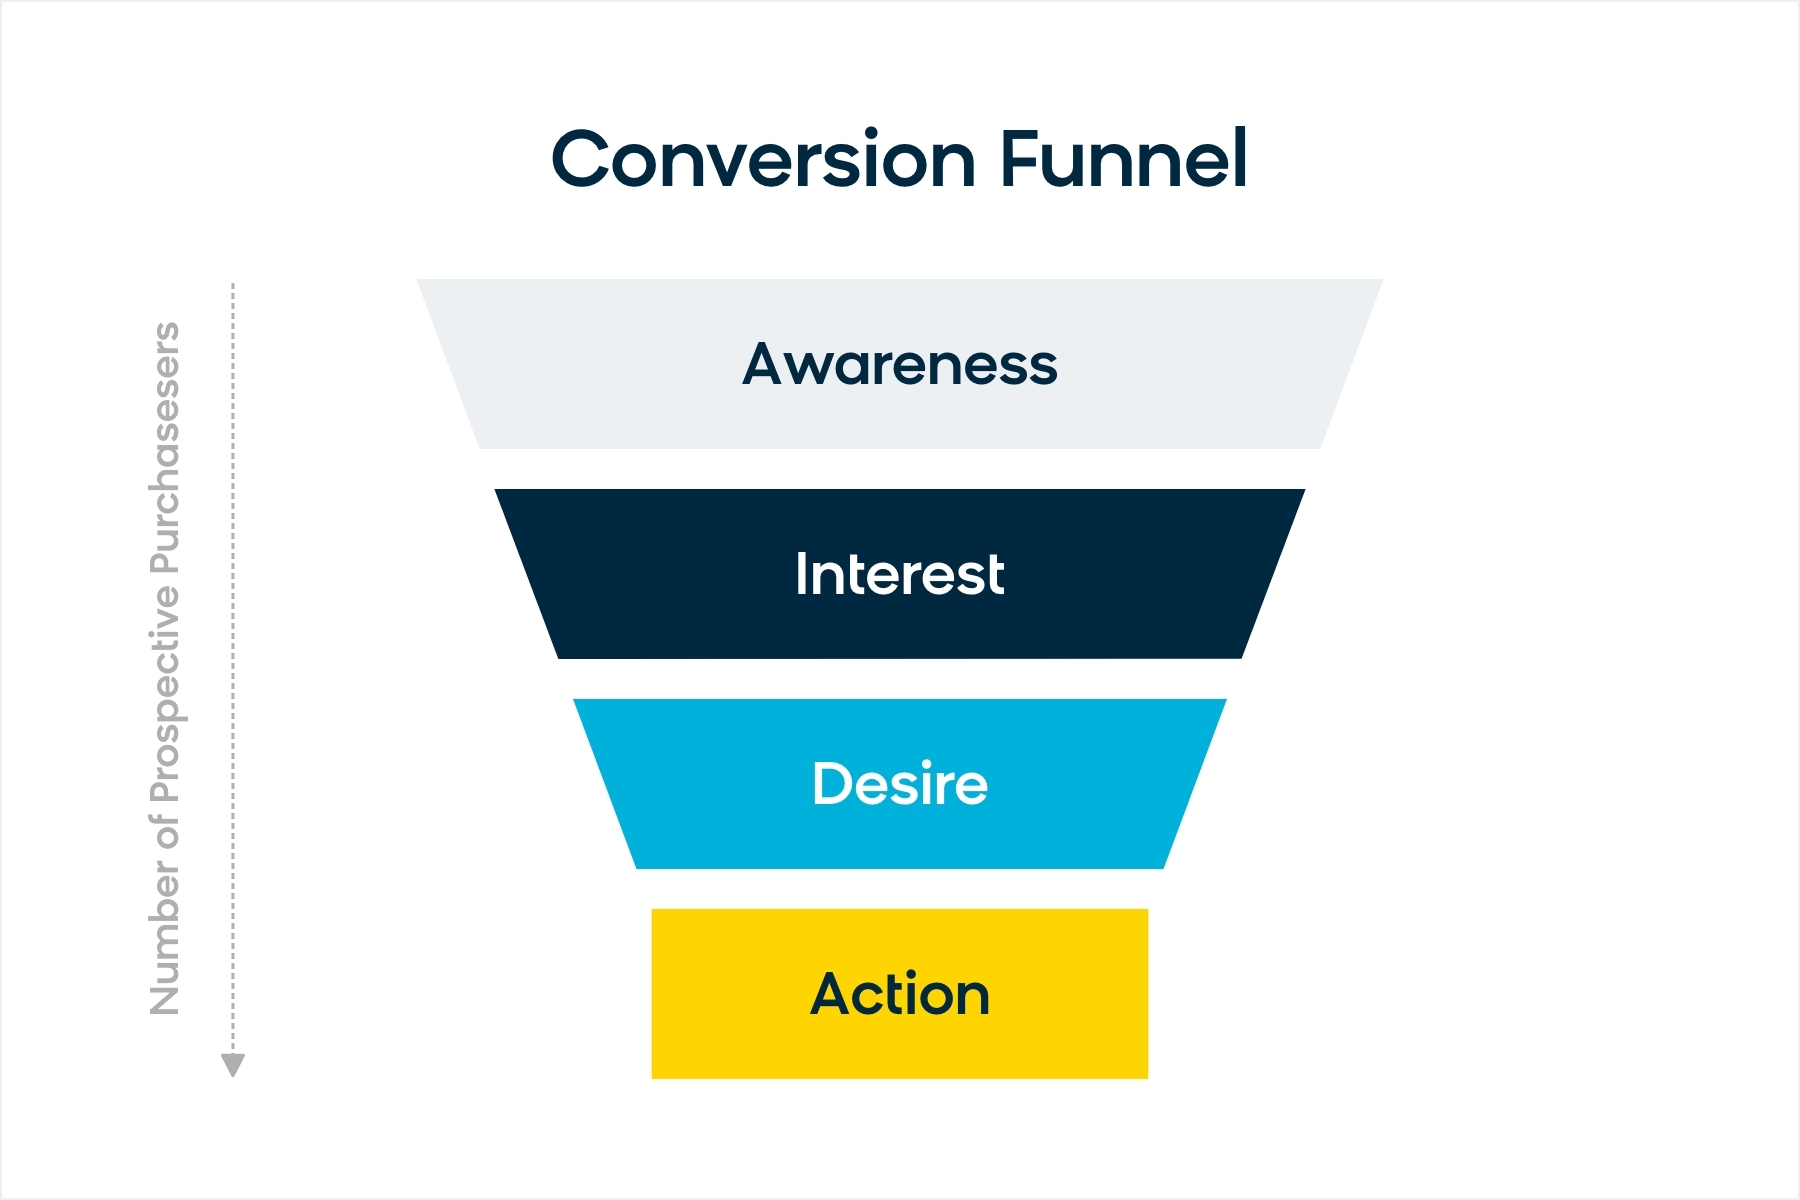 what is a conversion funnel